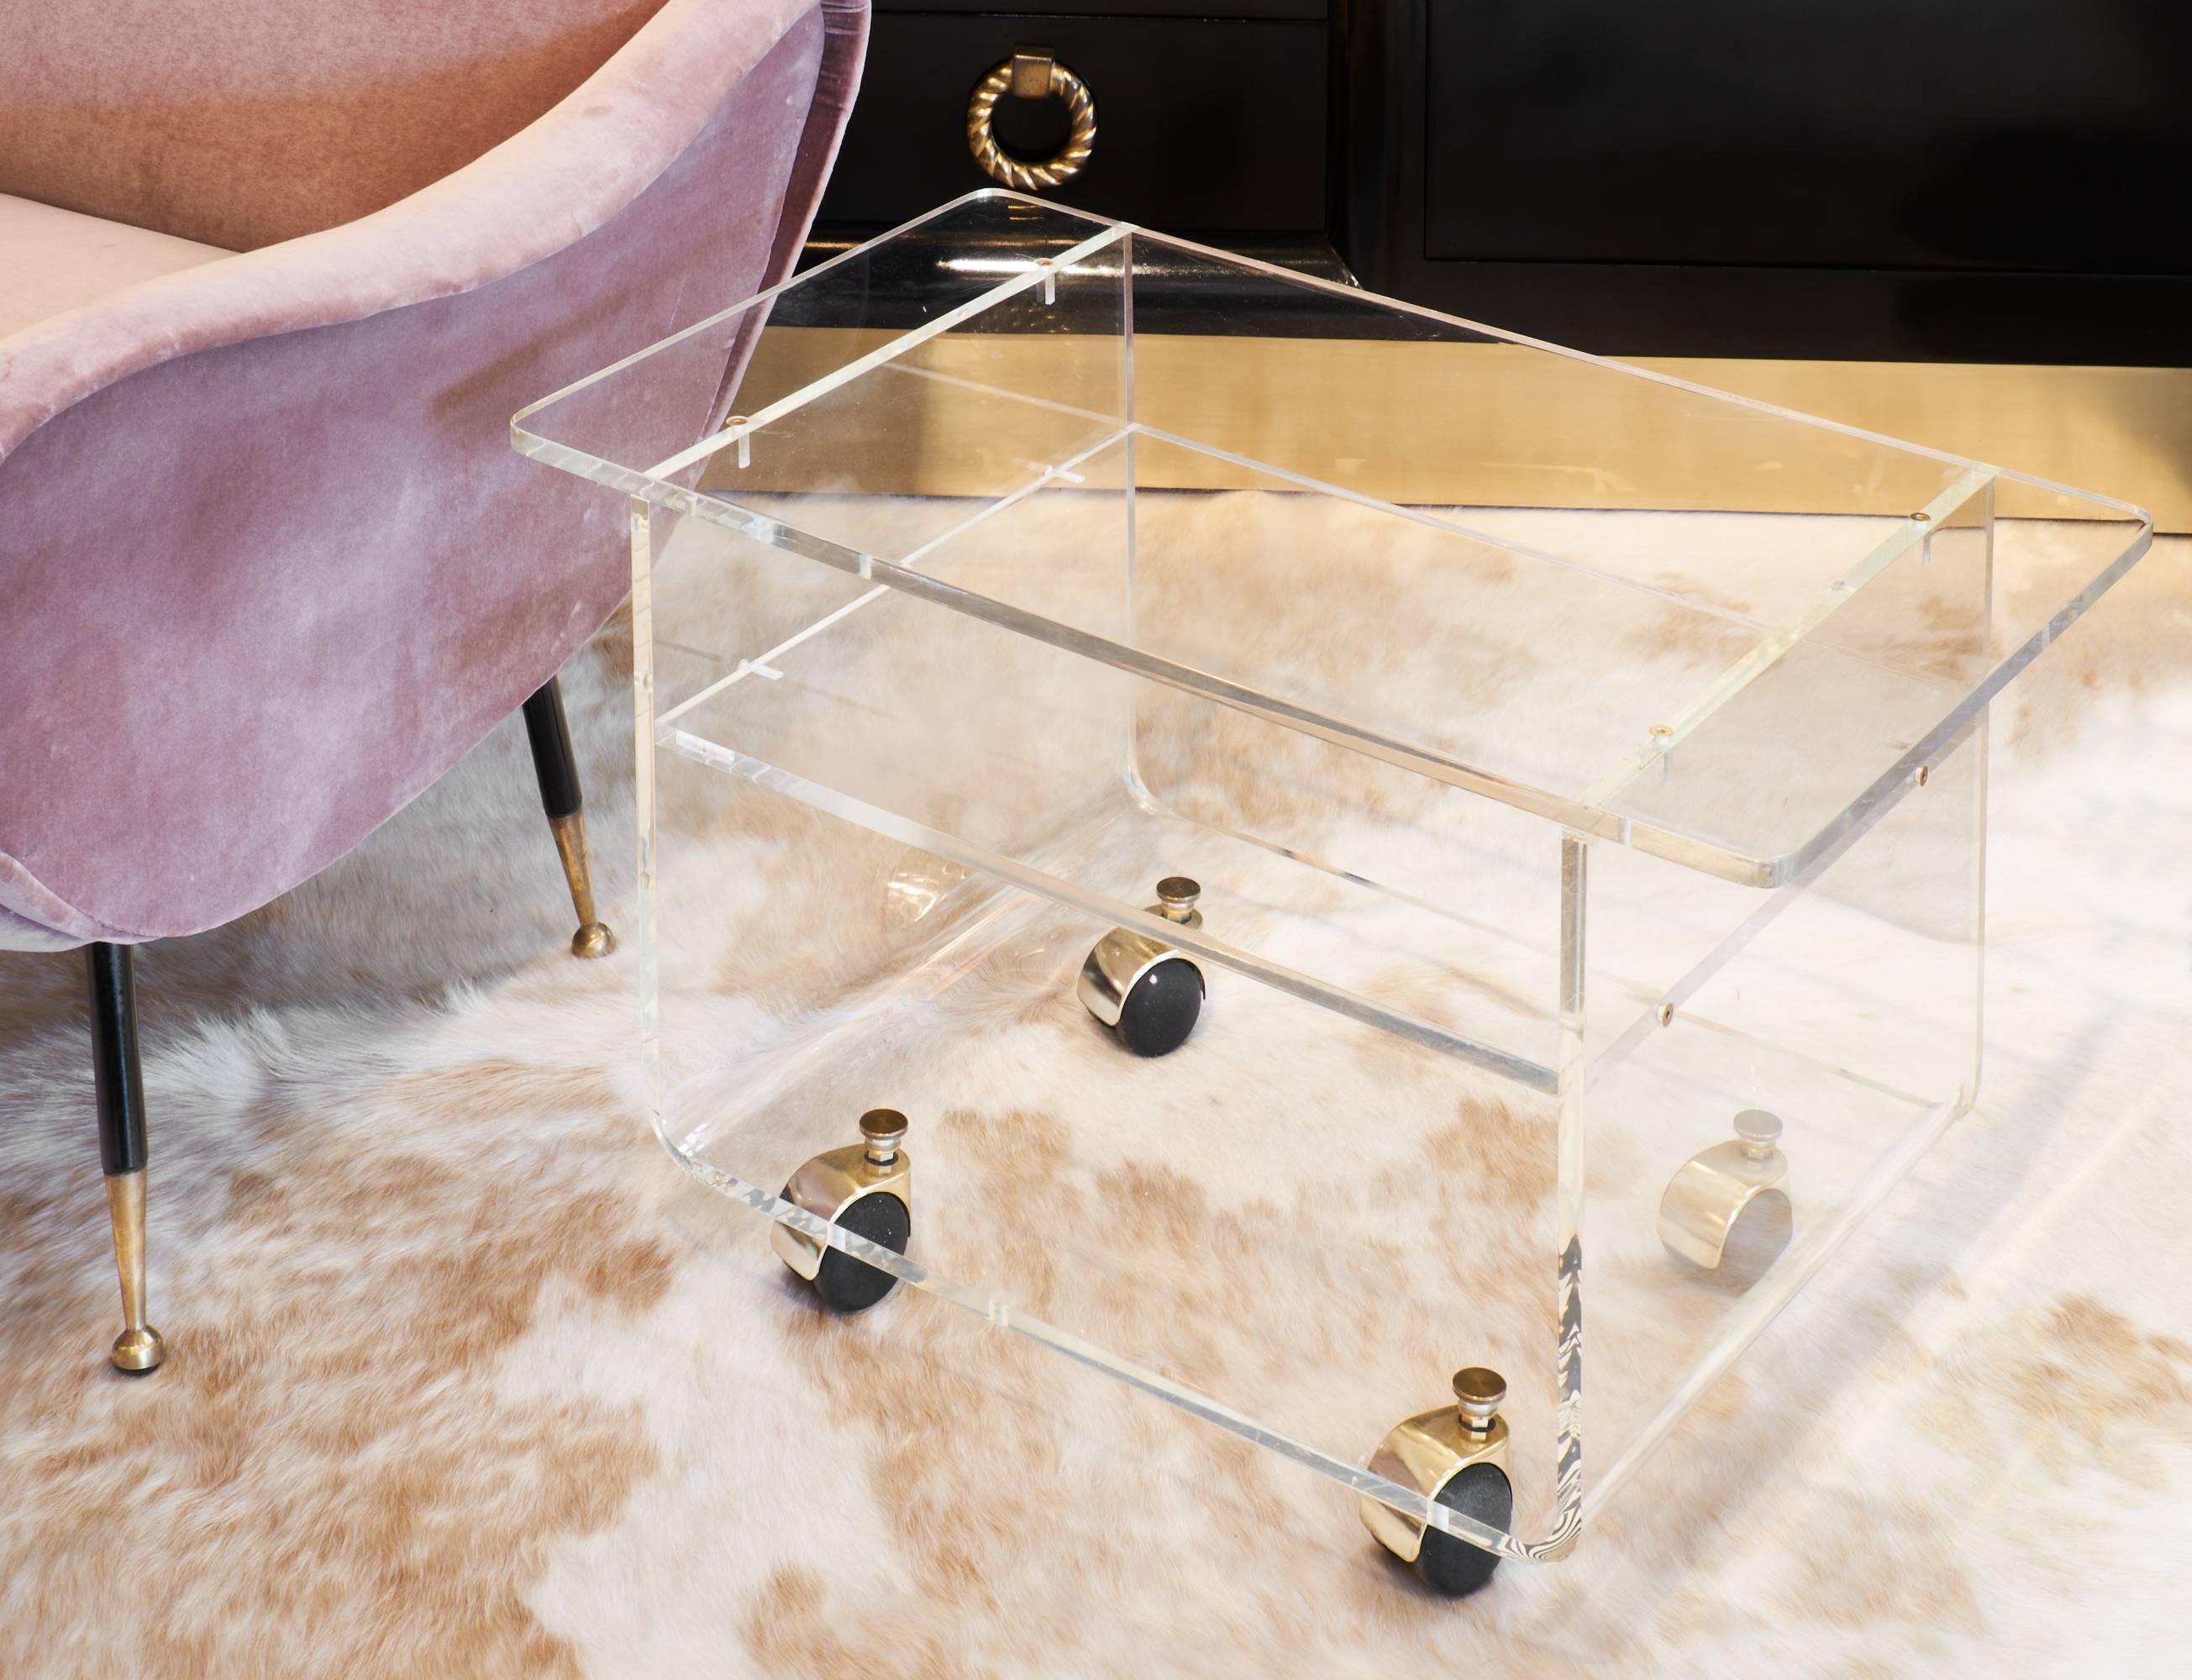 French vintage bar cart or occasional table on wheels, formed of Lucite (clear acrylic) with brass fasteners. A unique shape with a long top, curving base and a middle shelf.